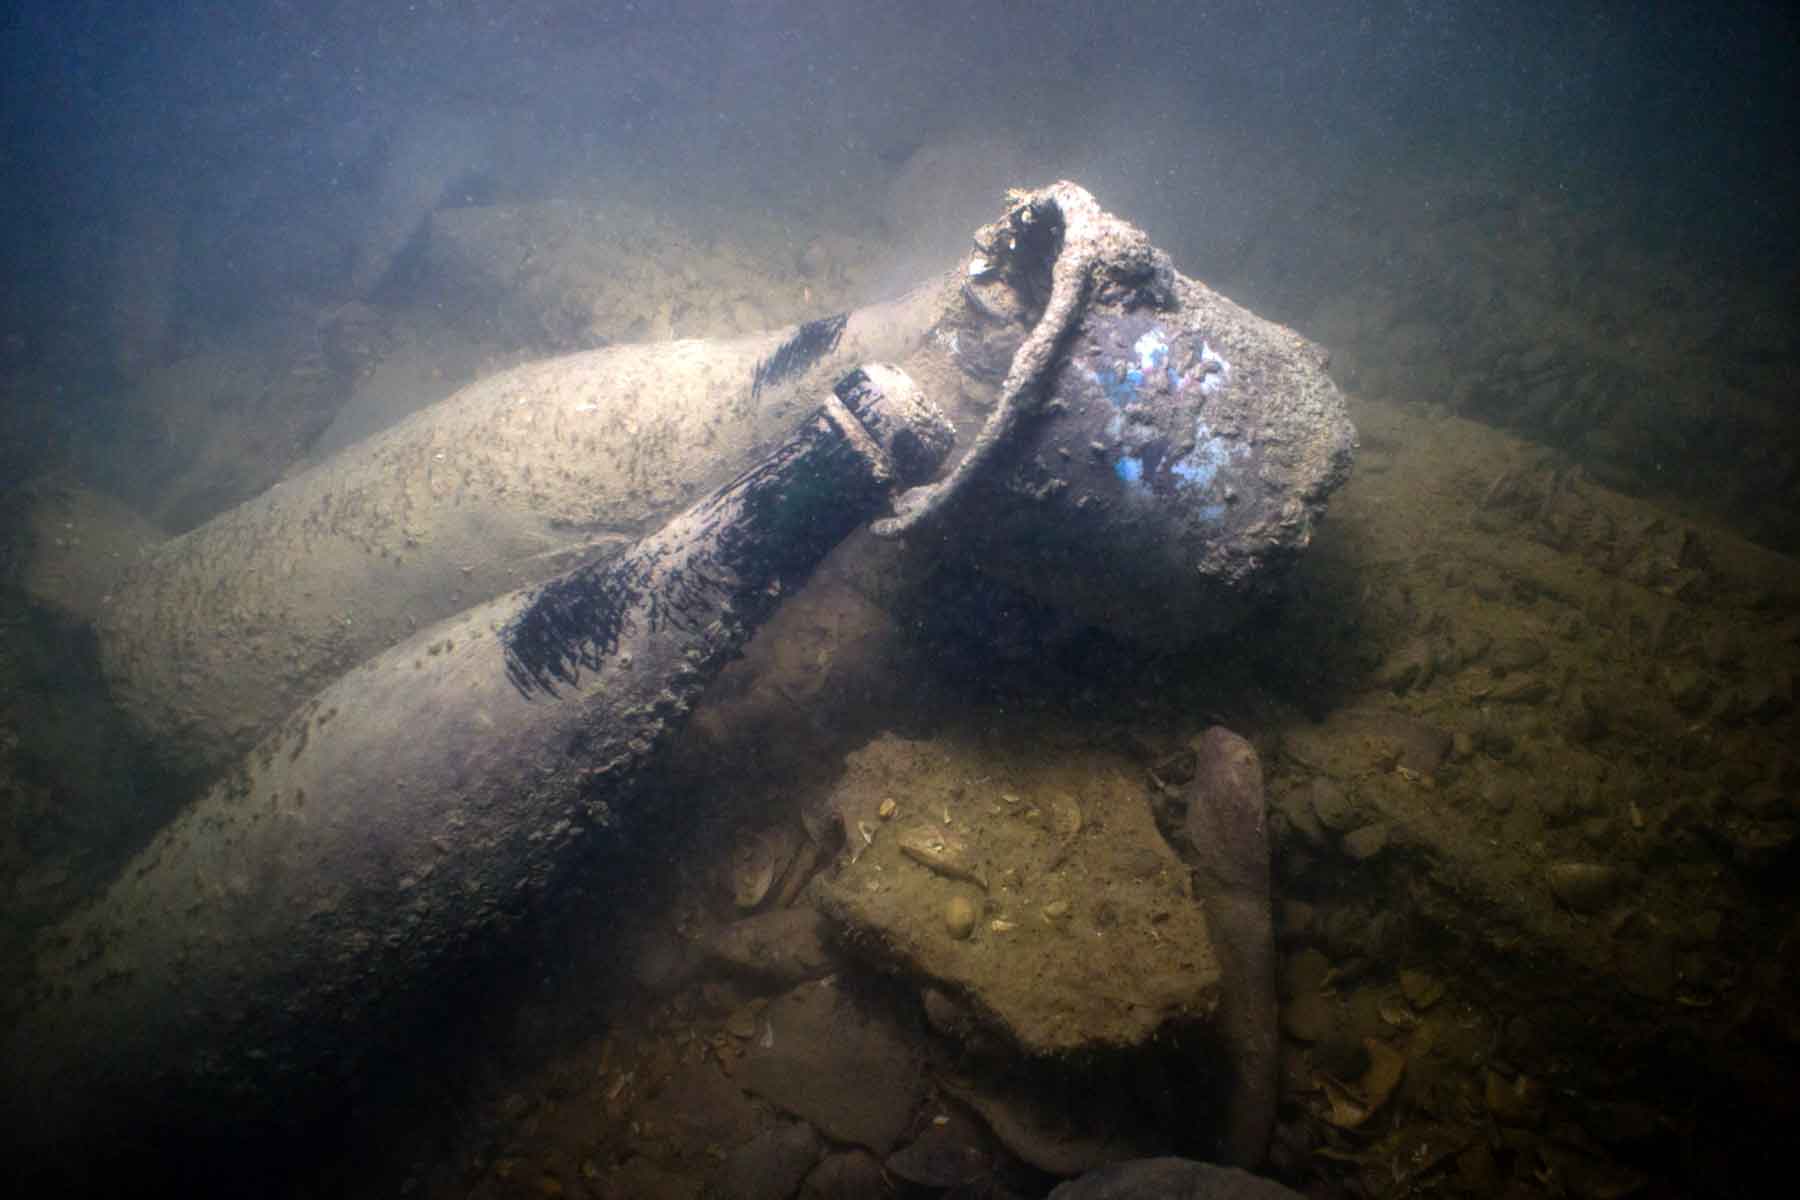 Old wine bottles found in a shipwreck